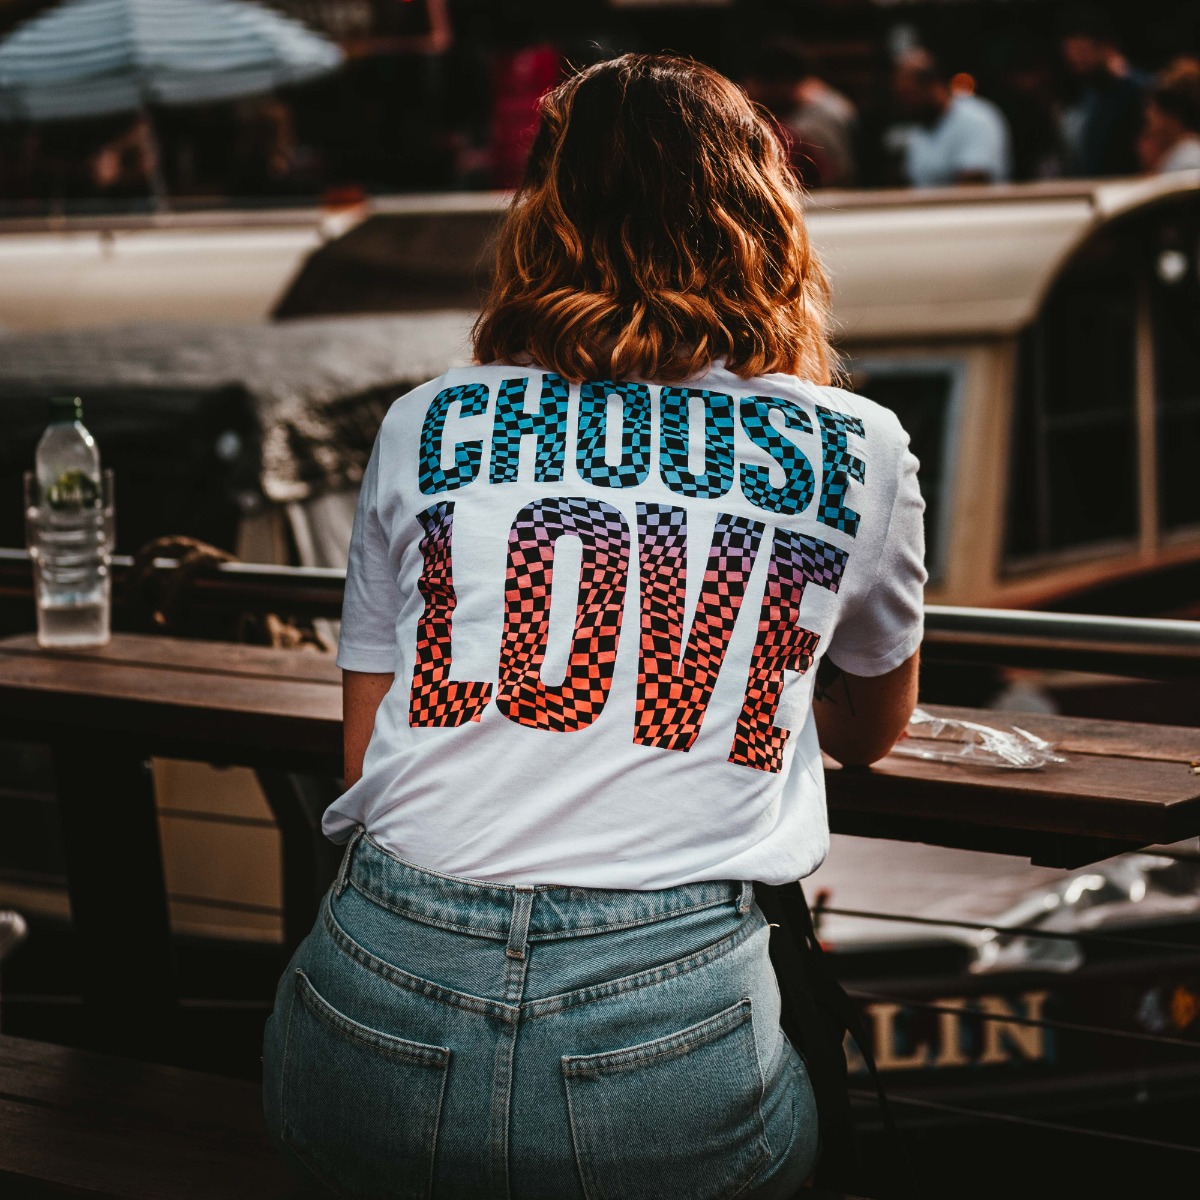 A woman facing away from the camera, wearing a shirt that says "choose love" 